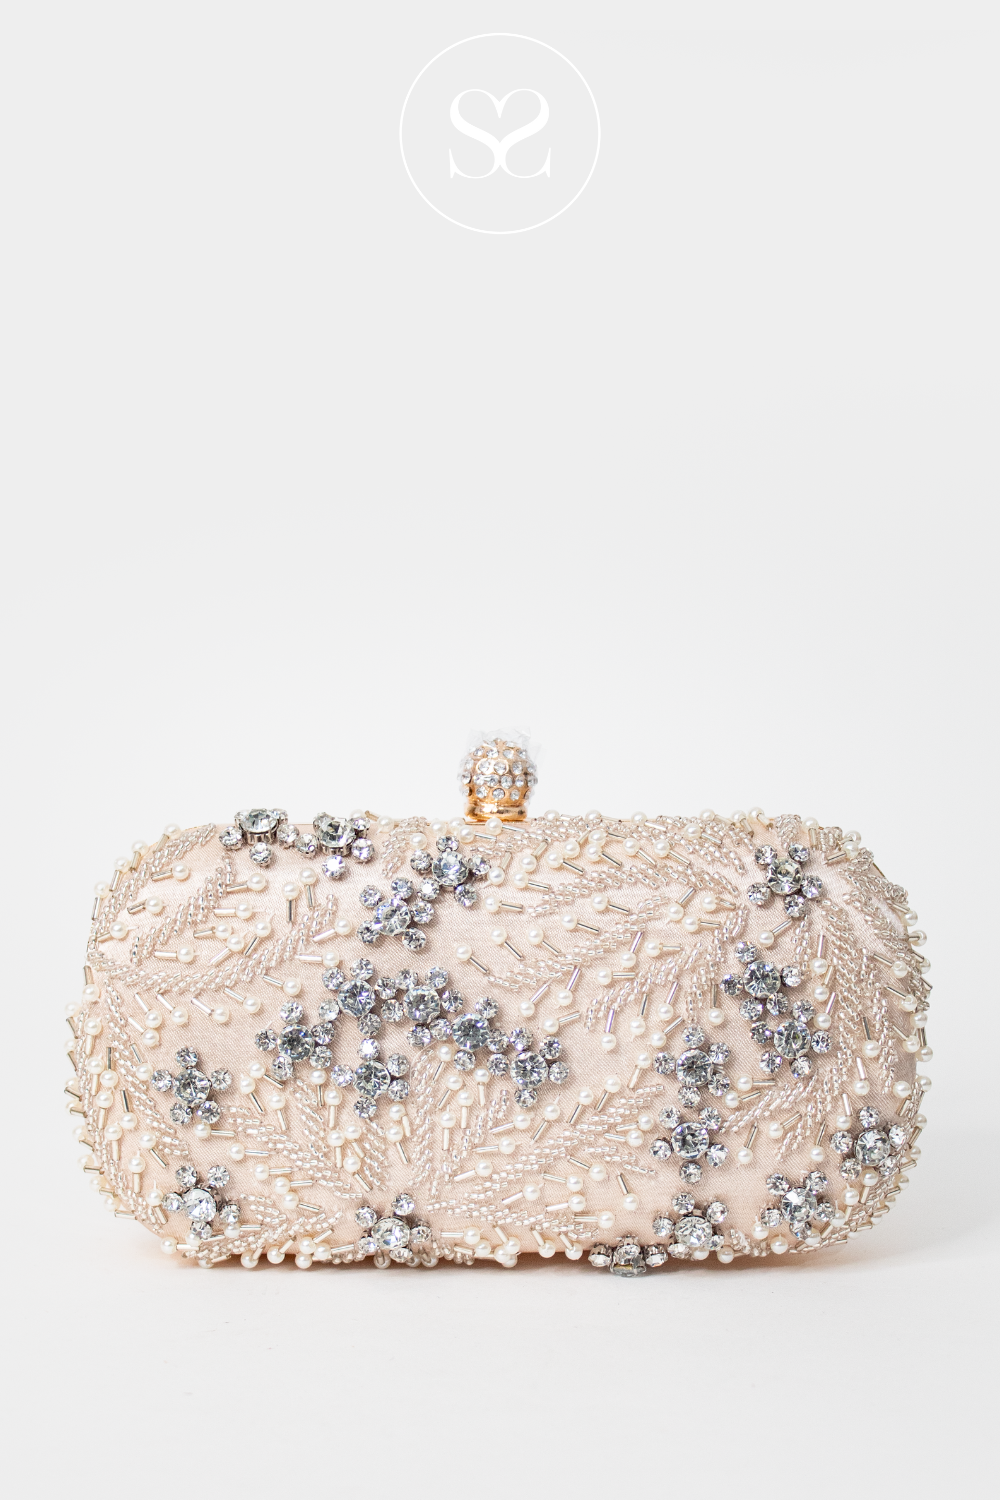 SHENEIL 006 NUDE BOX CLUTCH IN NUDE WITH SILVER AND PEARL EMBELLISHMENT